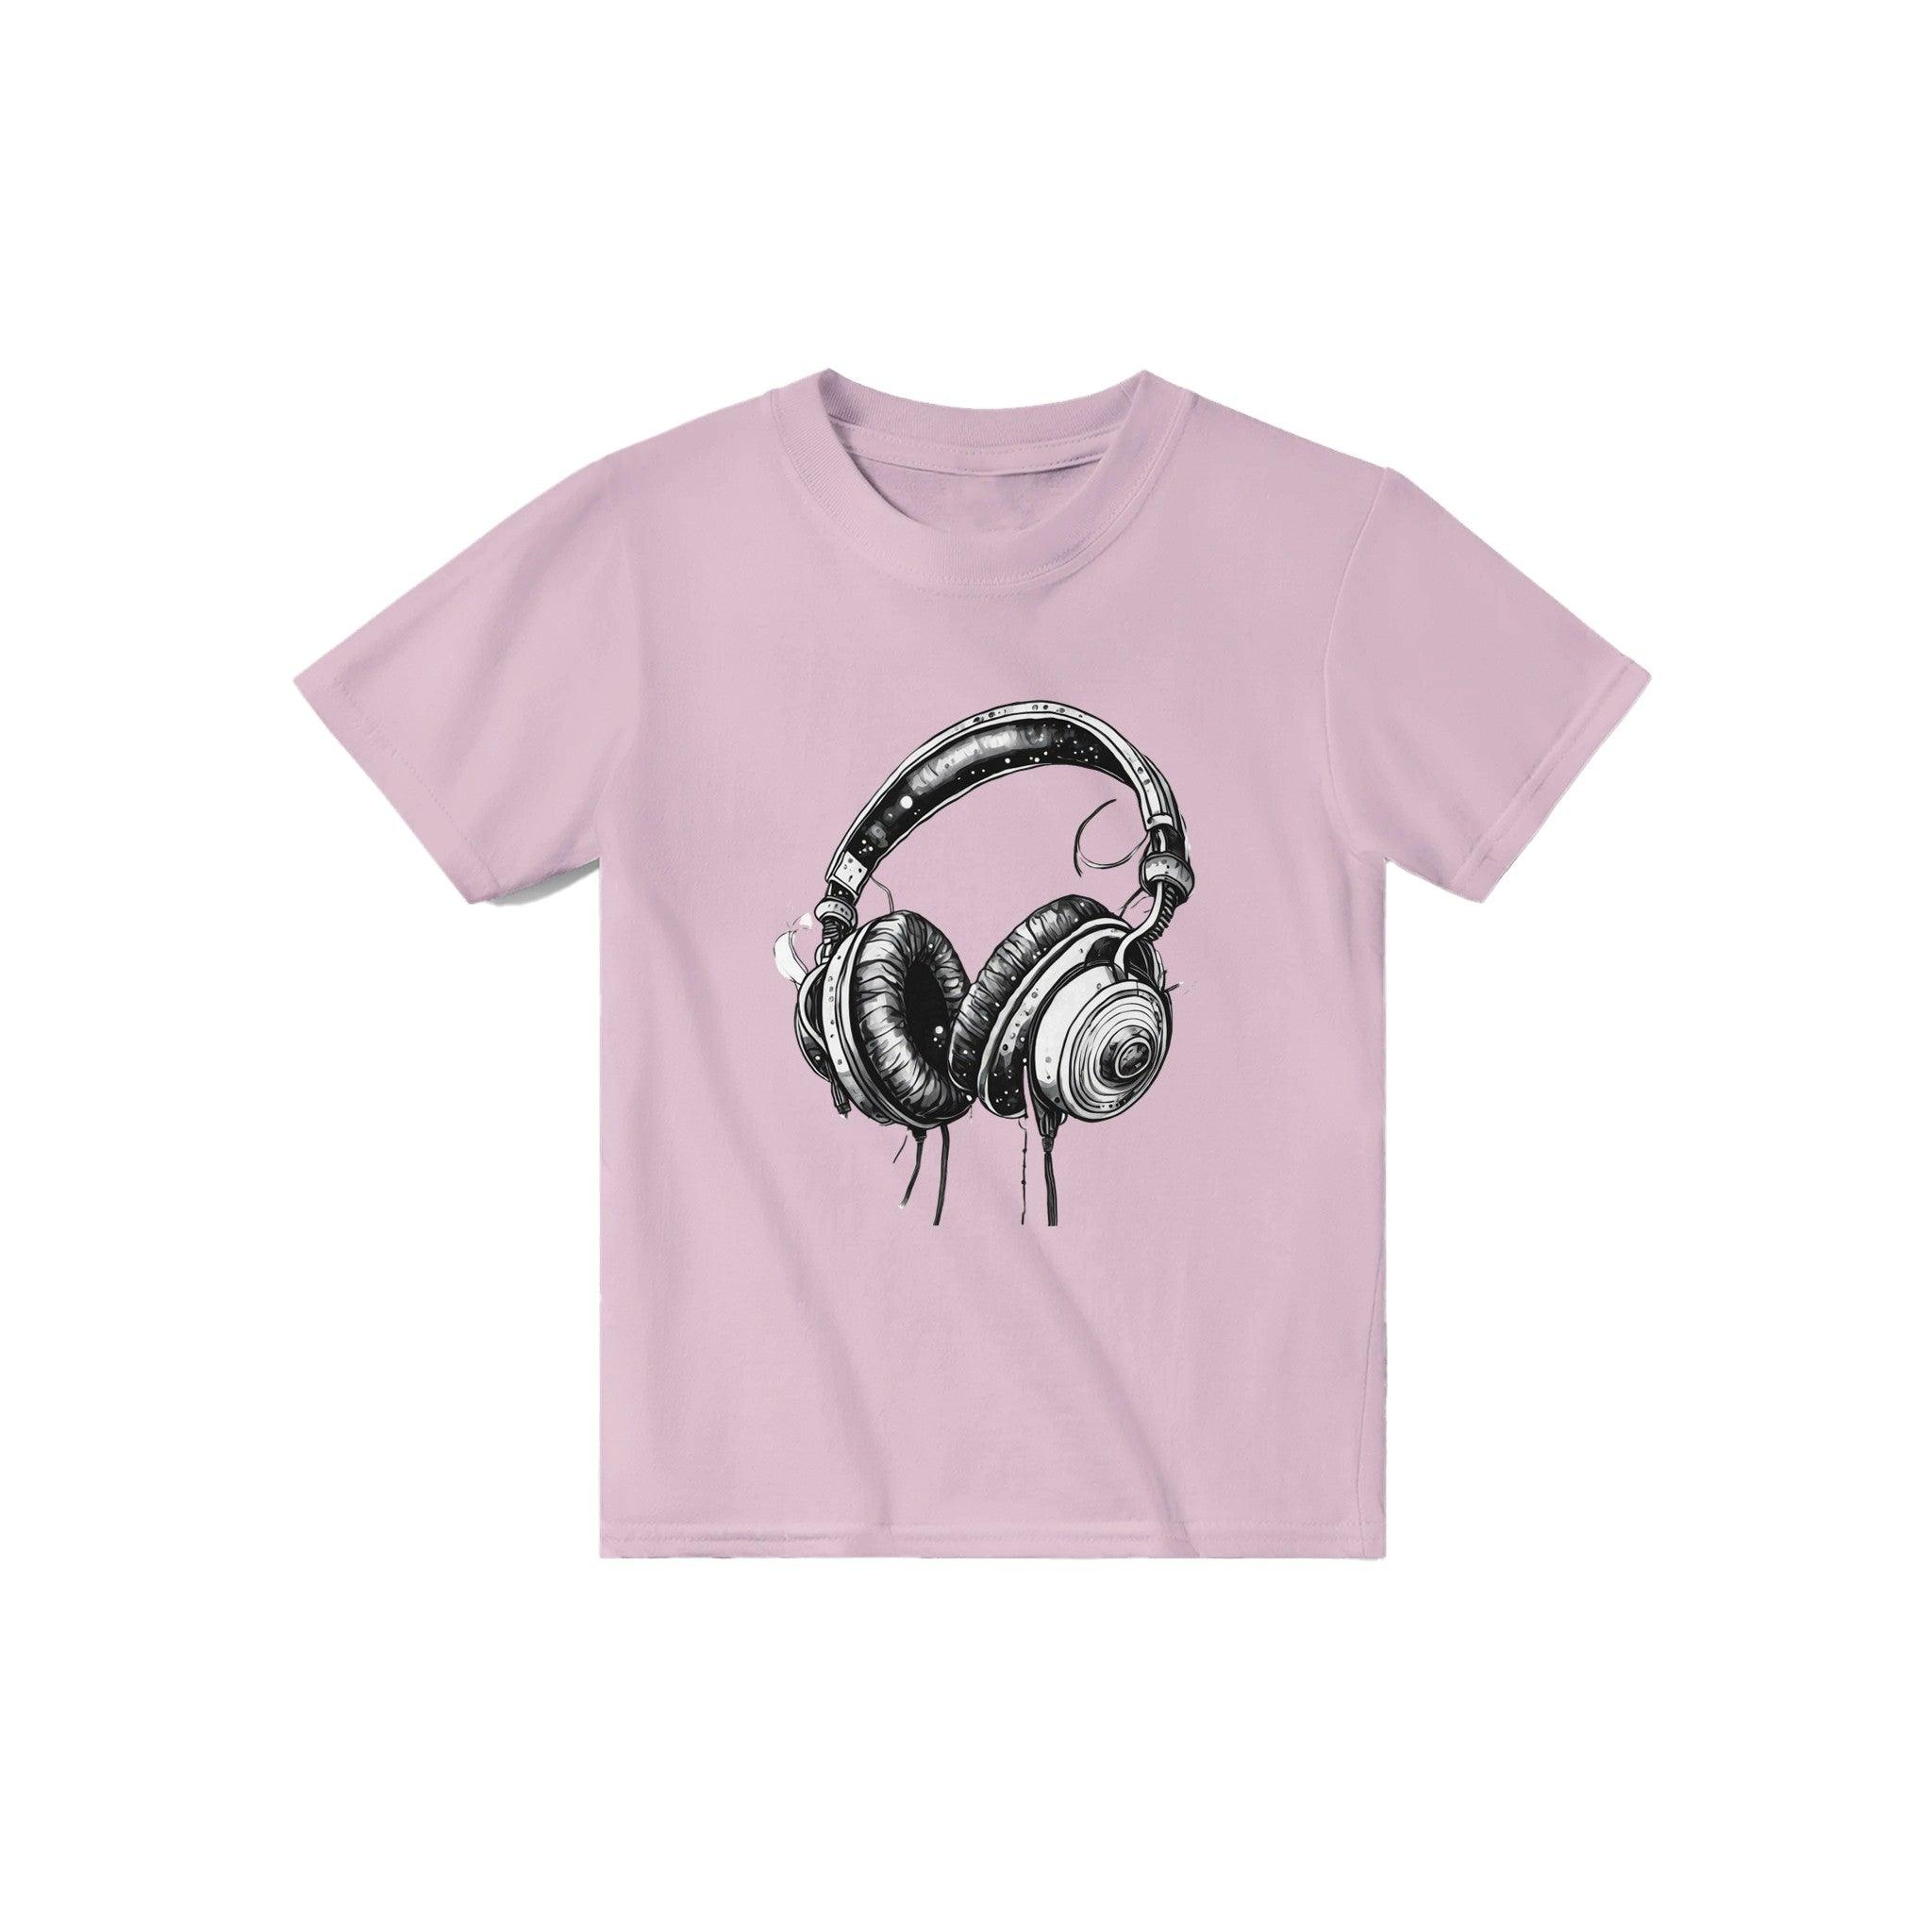 'Plugged In' Baby Tee - POMA